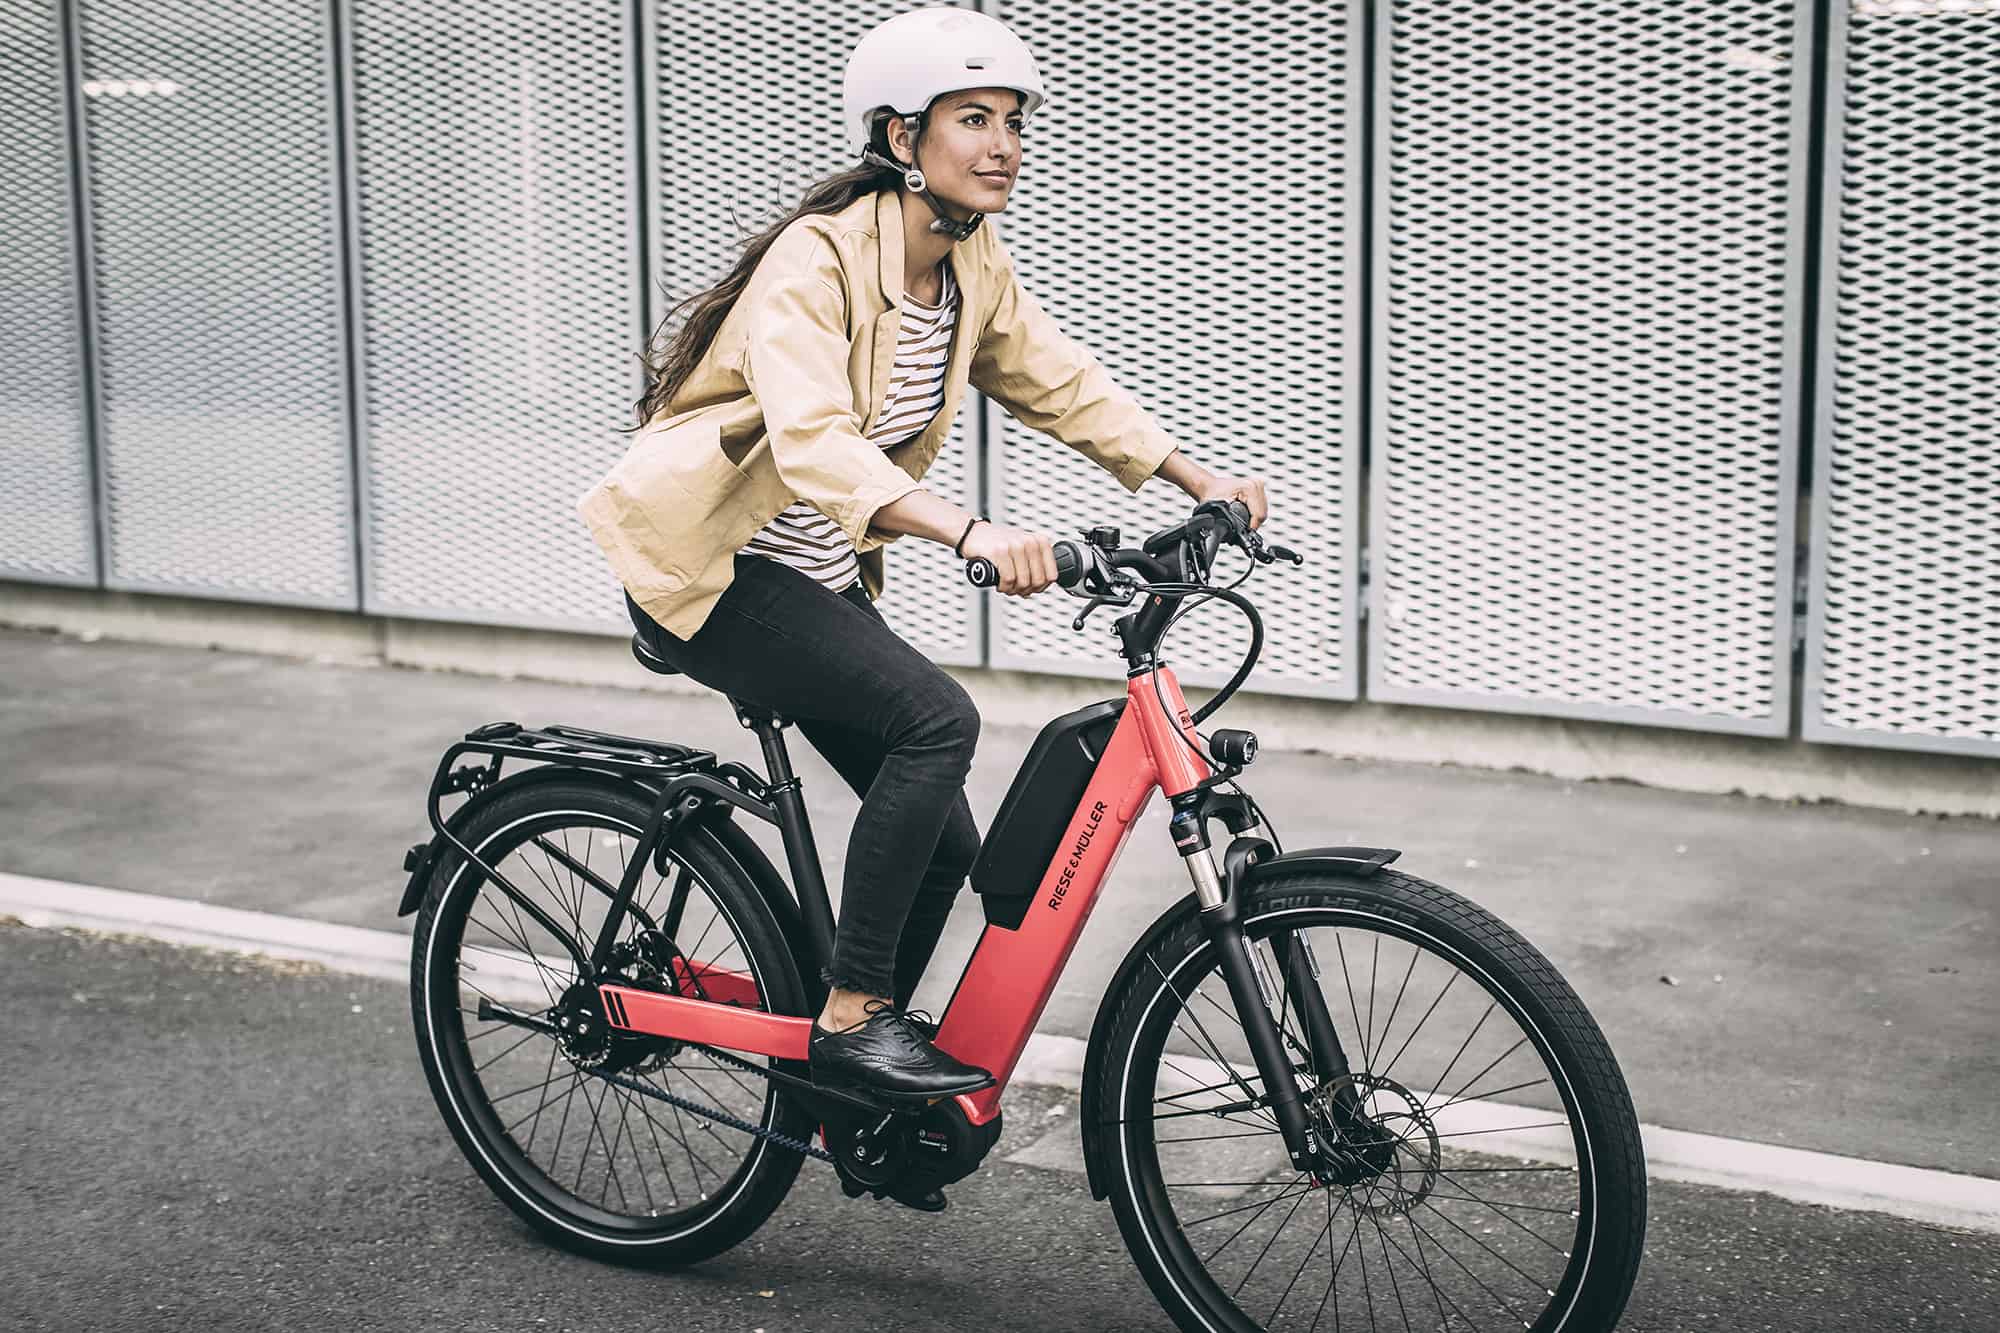 Top-Rated Electric Bikes for Commuting